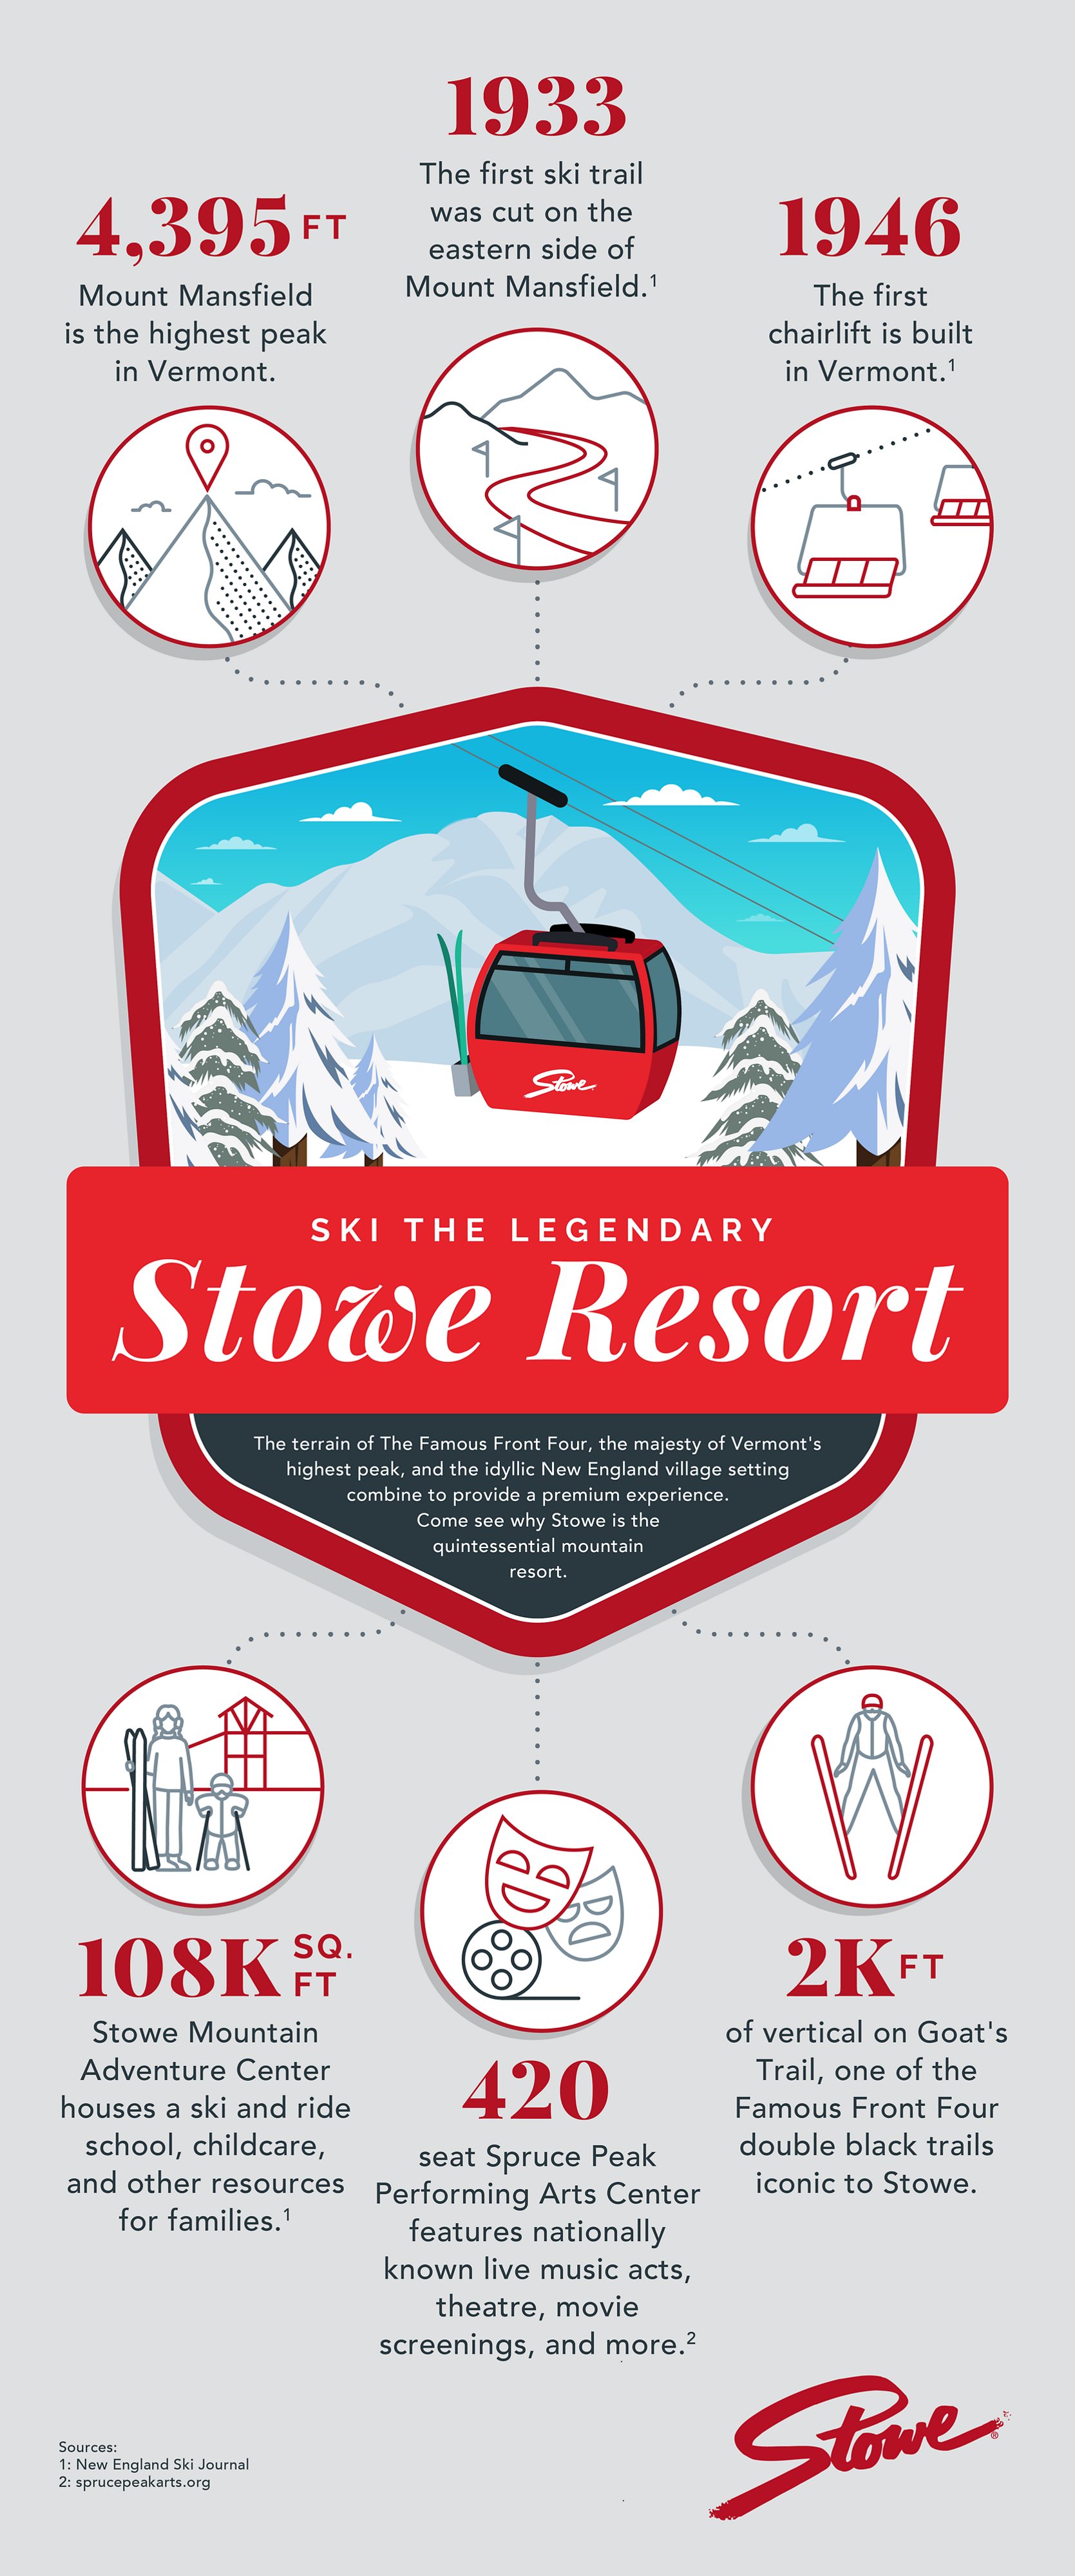 An infographic with key facts about the iconic Stowe Mountain Resort including: the tallest peak at 4395 feet, first chair lift built in 1946, 2,000 feet of vertical, and 108,000 square foot adventure center.